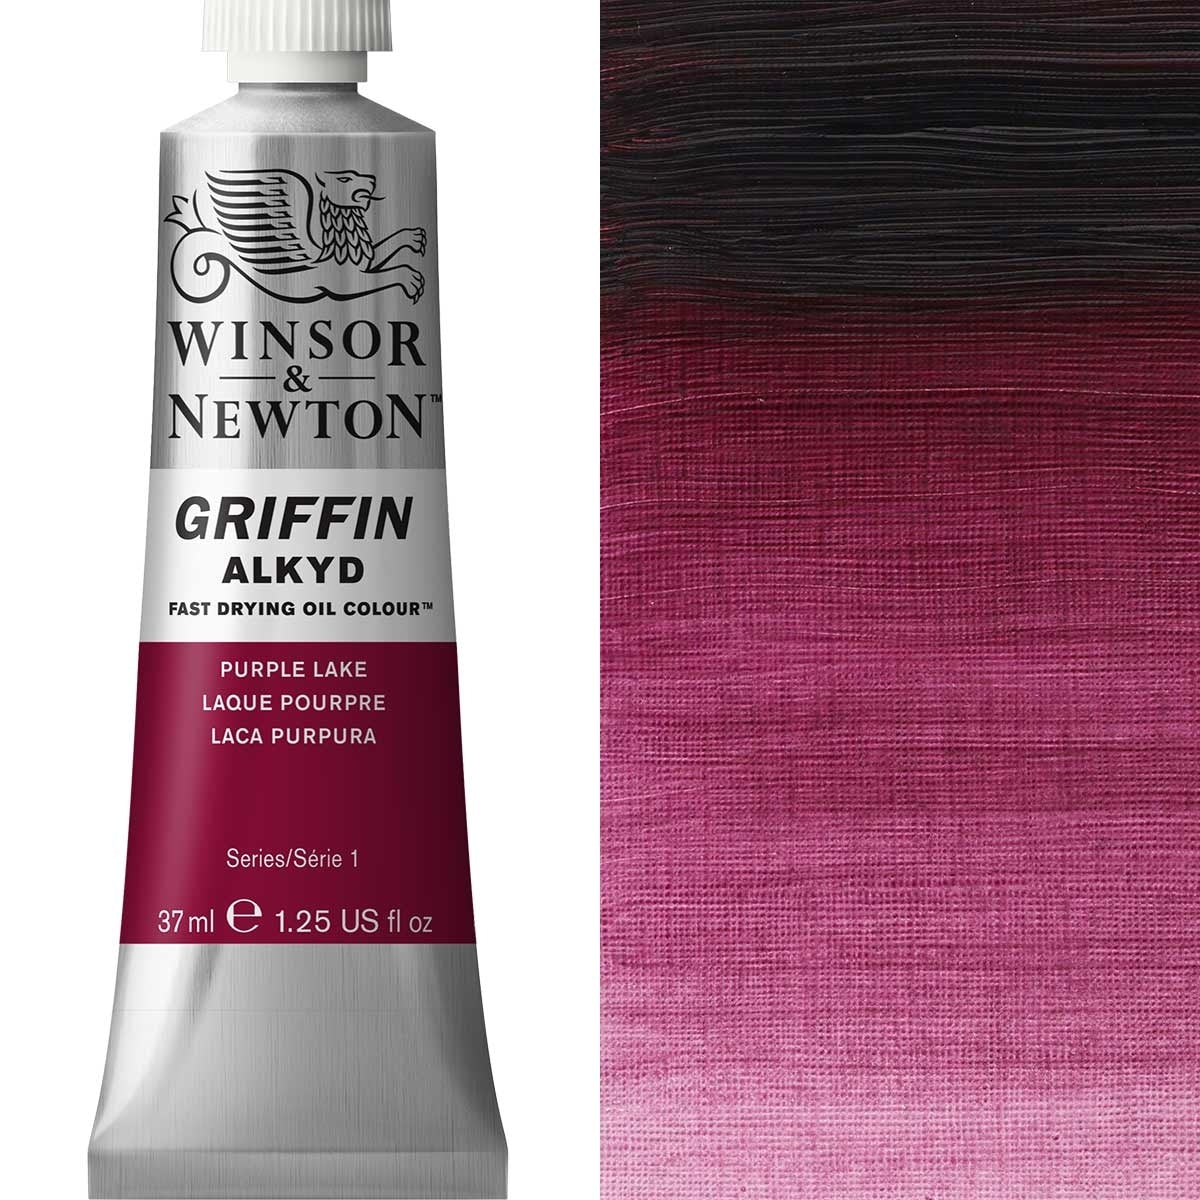 Winsor and Newton - Griffin ALKYD Oil Colour - 37ml - Purple Lake